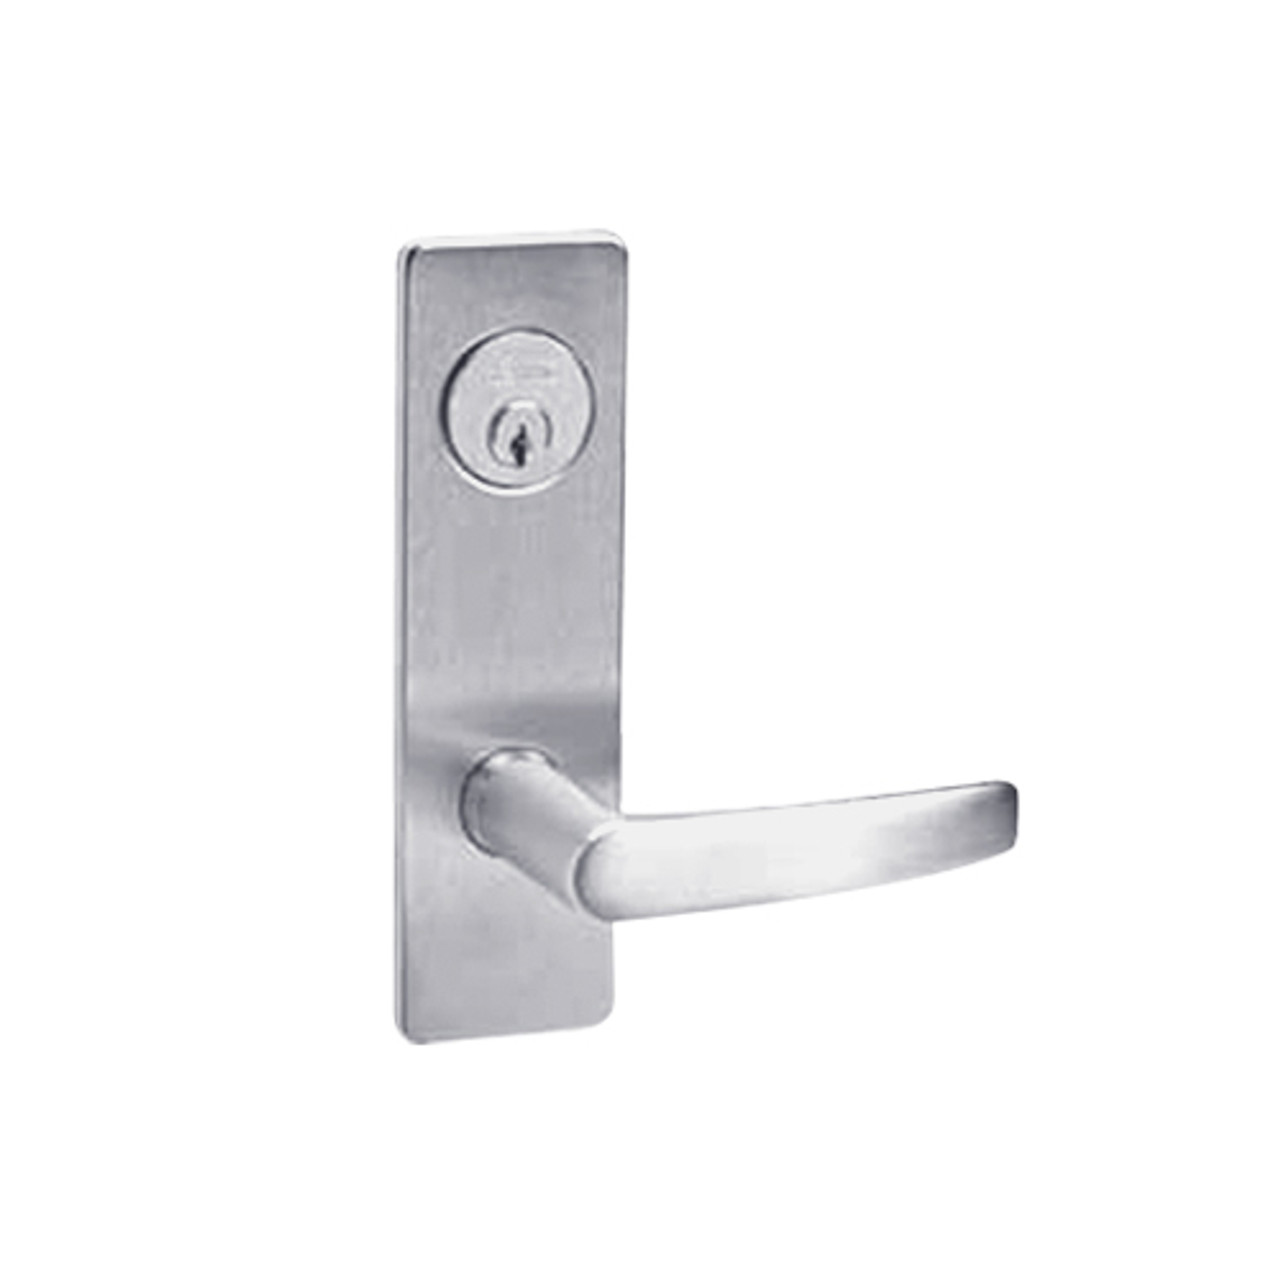 ML2058-ASM-626 Corbin Russwin ML2000 Series Mortise Entrance Holdback Locksets with Armstrong Lever in Satin Chrome